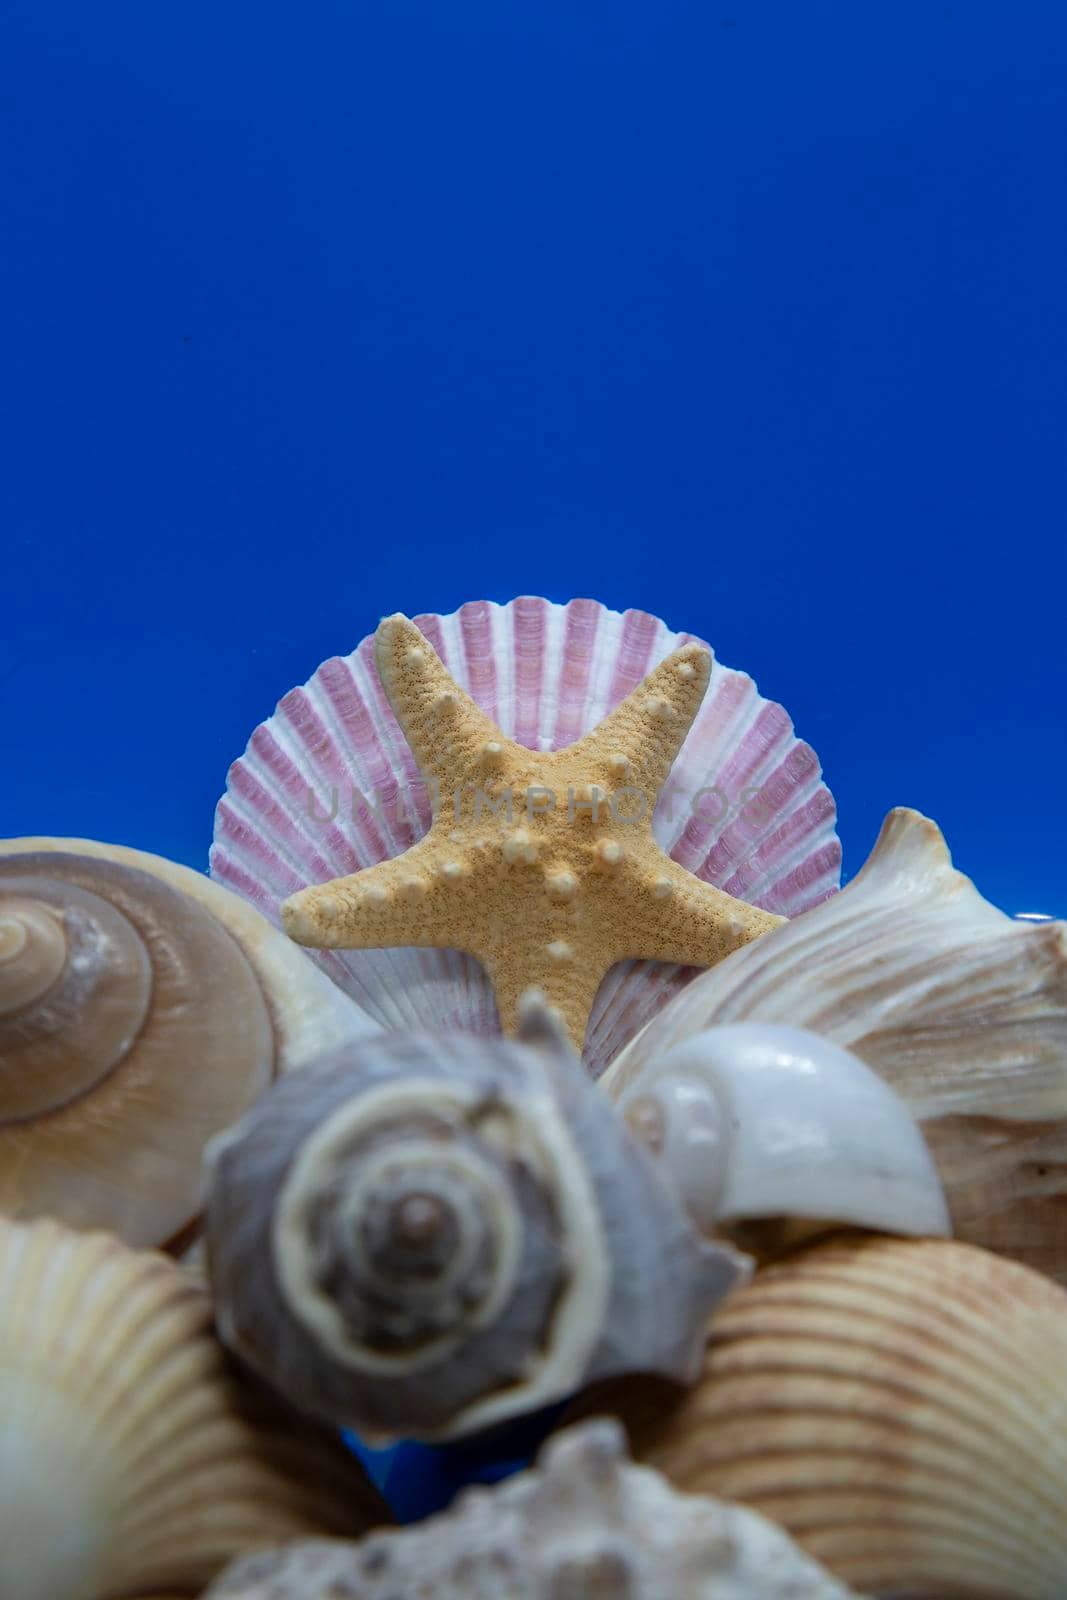 Seashells, including scallop, cockle, moon, whelk, and button shells with a starfish against a blue background